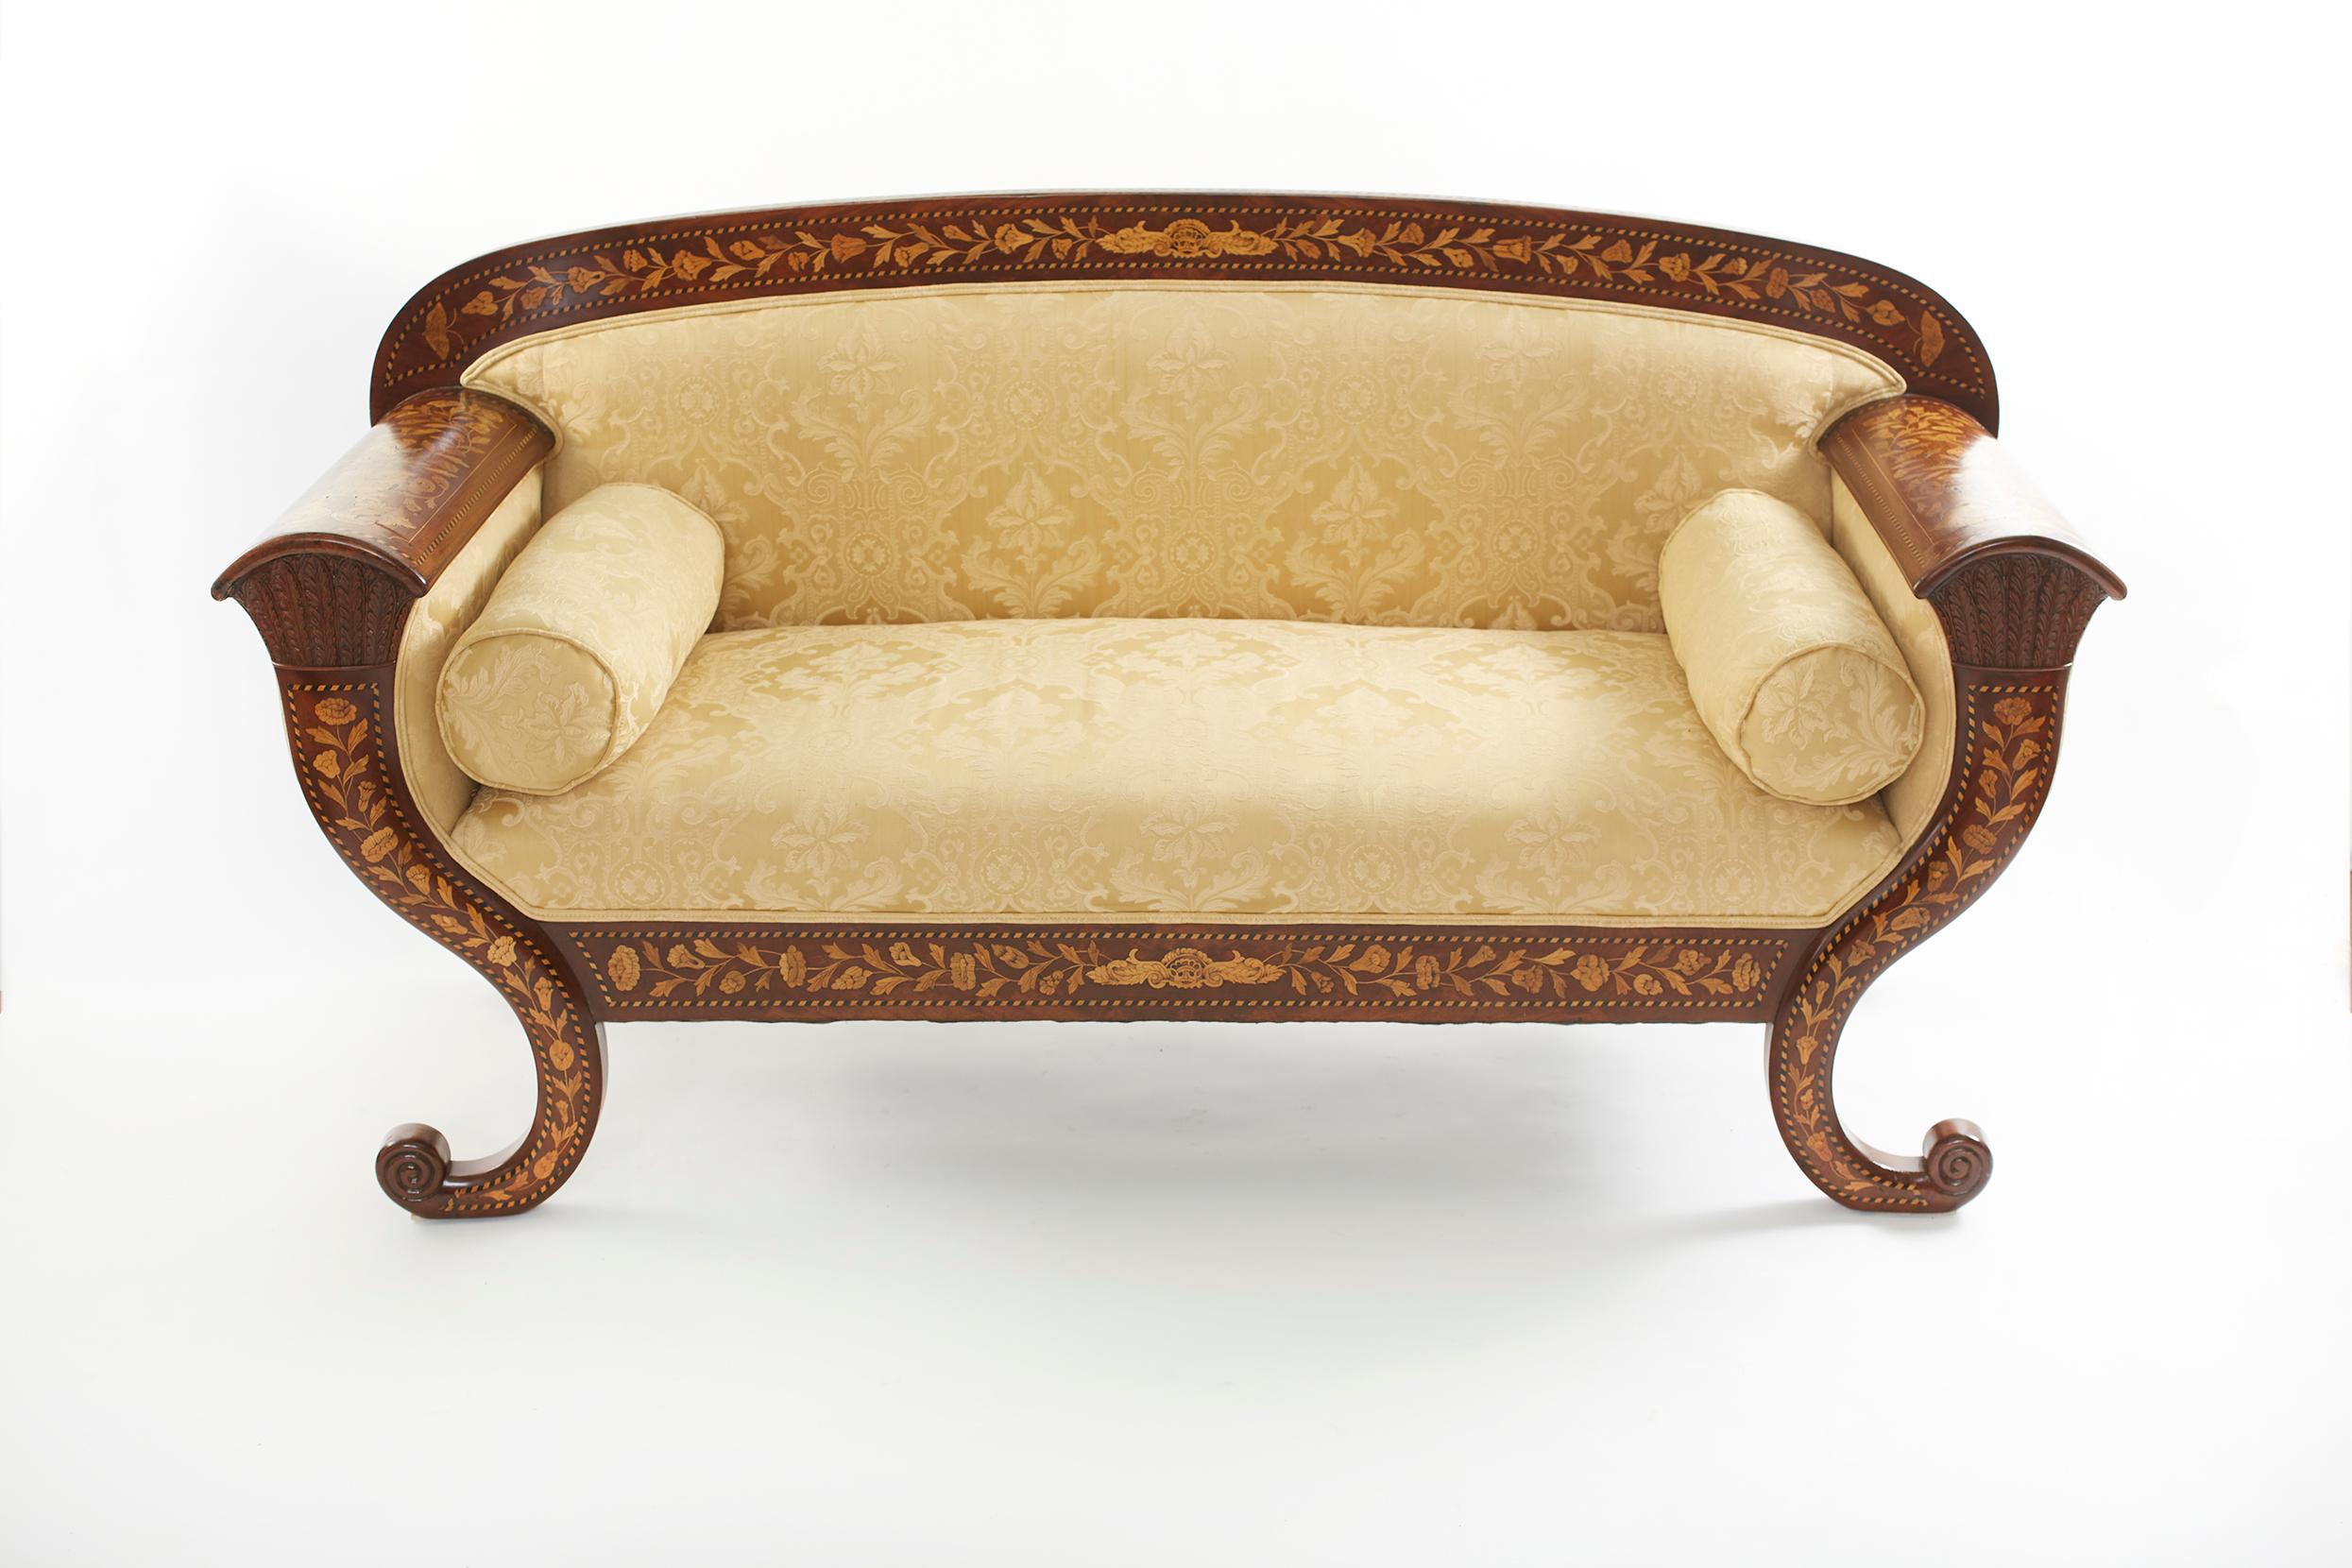 Early 19th Century Marquetry Wood Inlaid Sofa / Scrolled Back 7